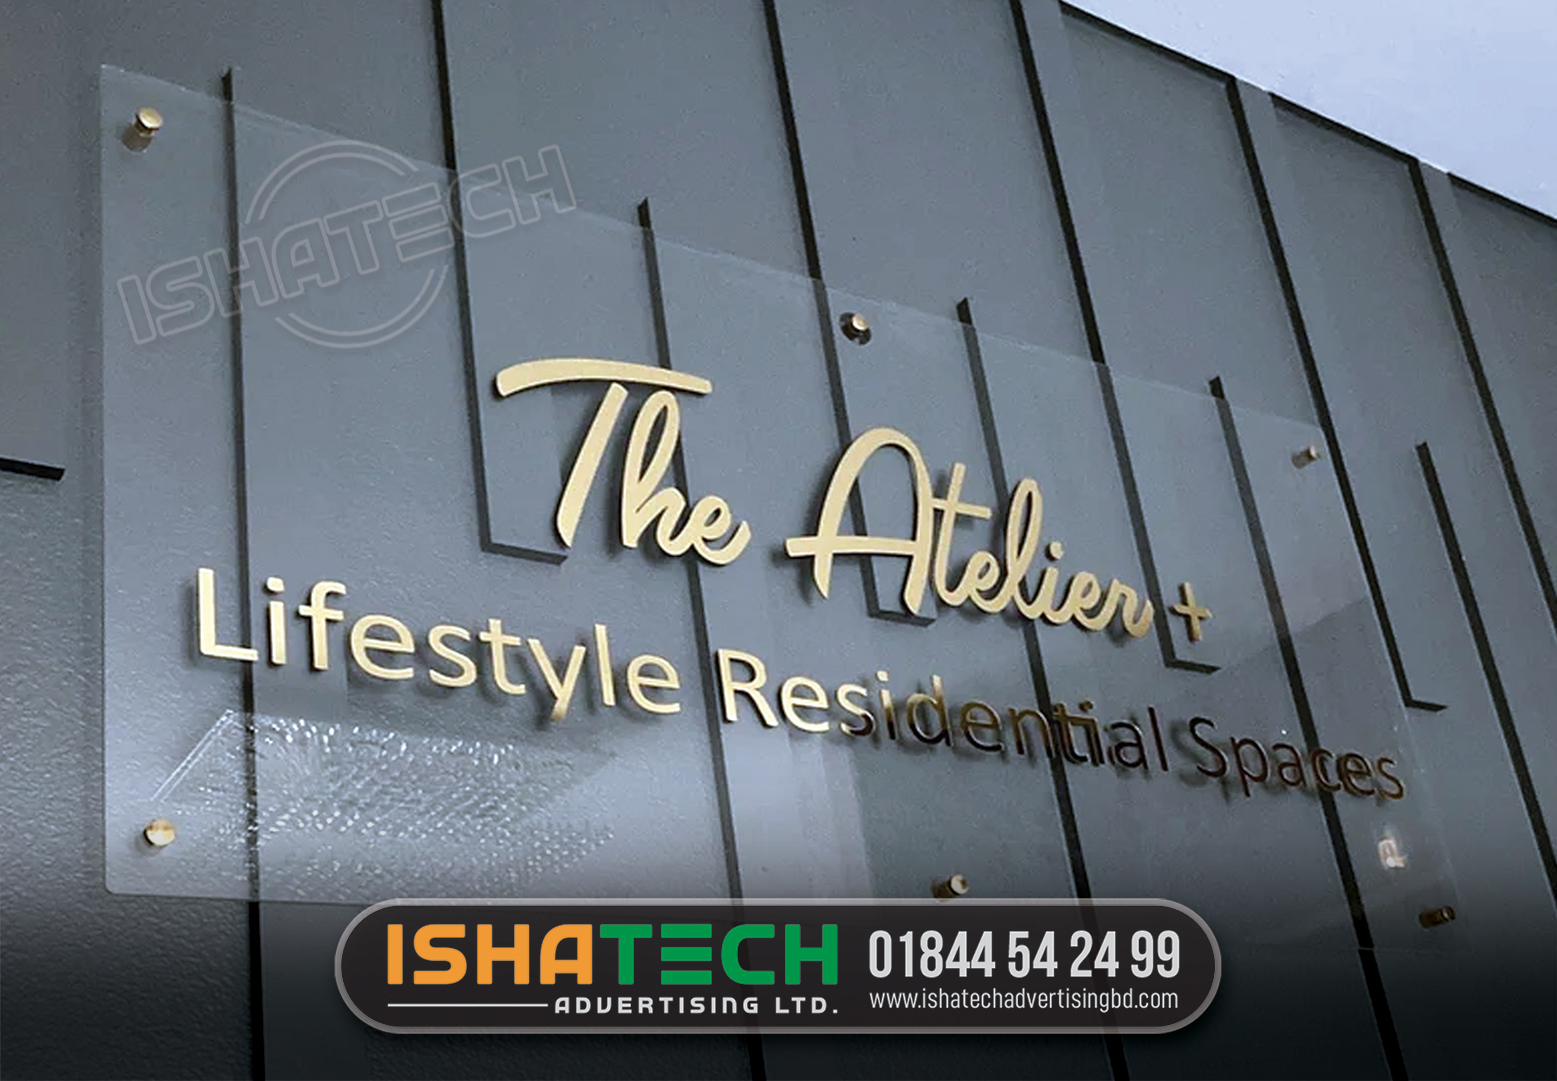 LIFE STYLE RESIDENTIAL SPARTES SHOPPING MALL OUTDOOR BRANDING, OUTDOOR GOLDEN LETTER SIGNS BD